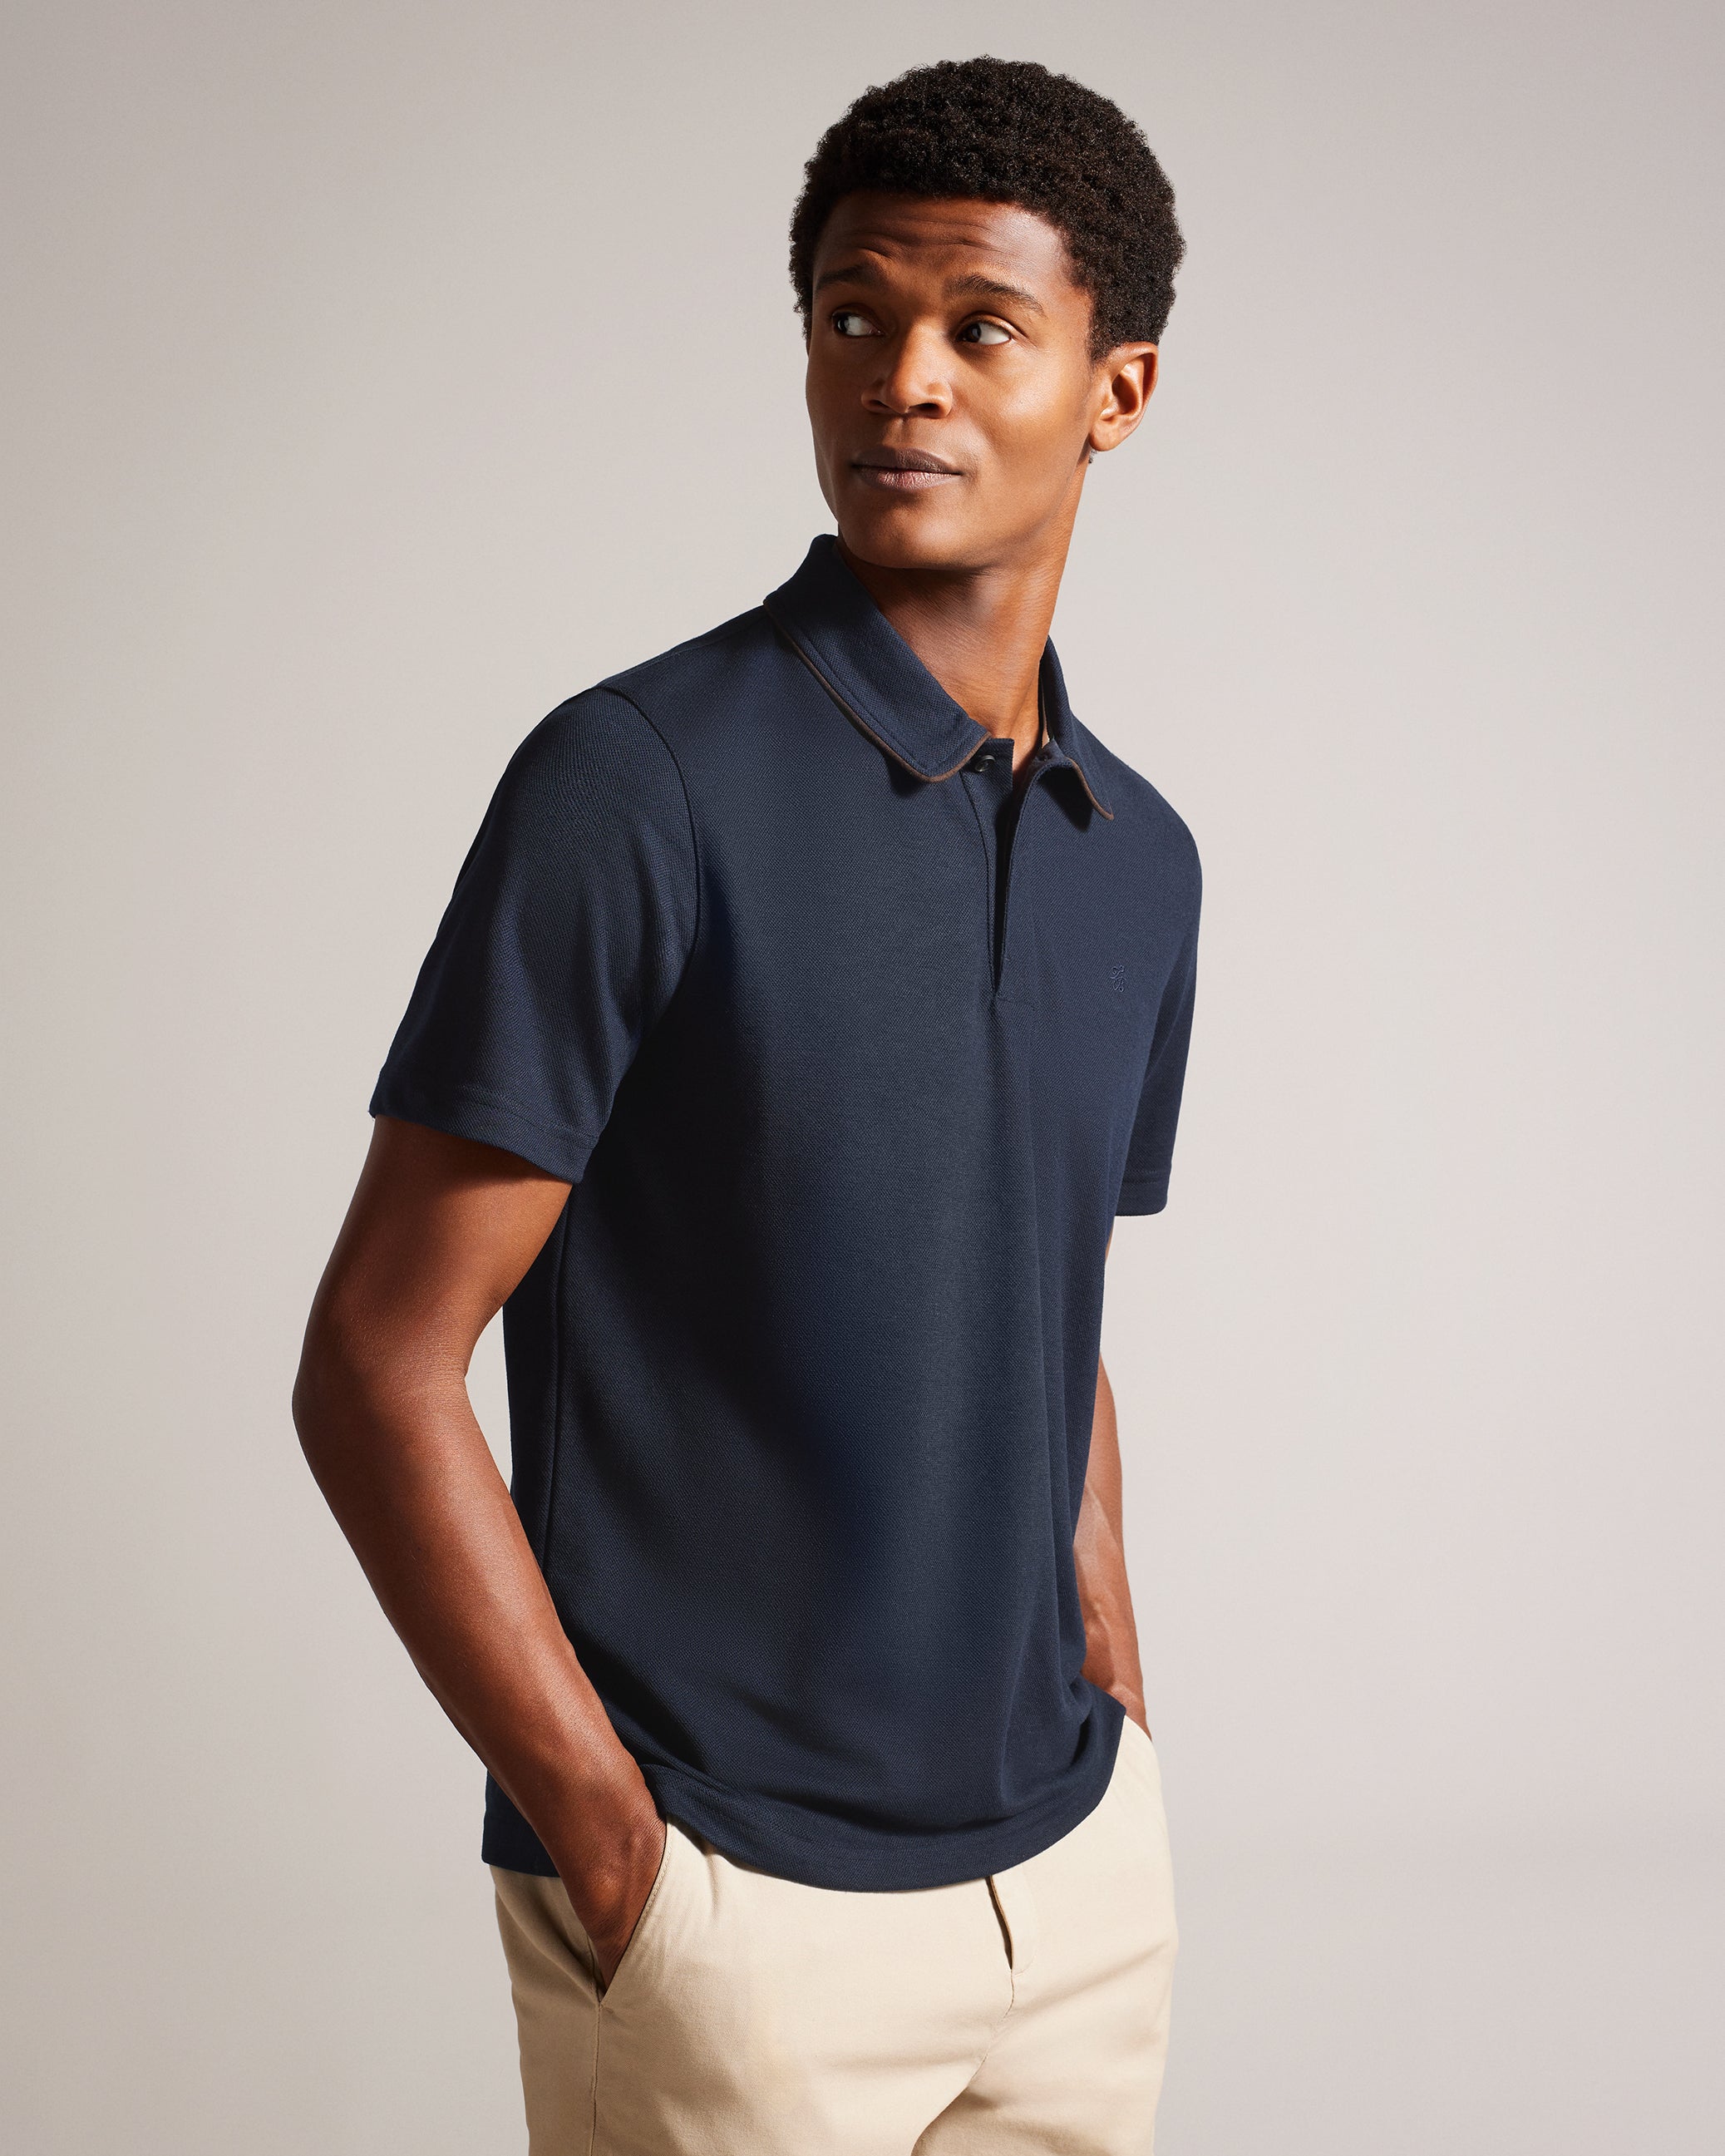 Men's New Shirts – Ted Baker, Canada